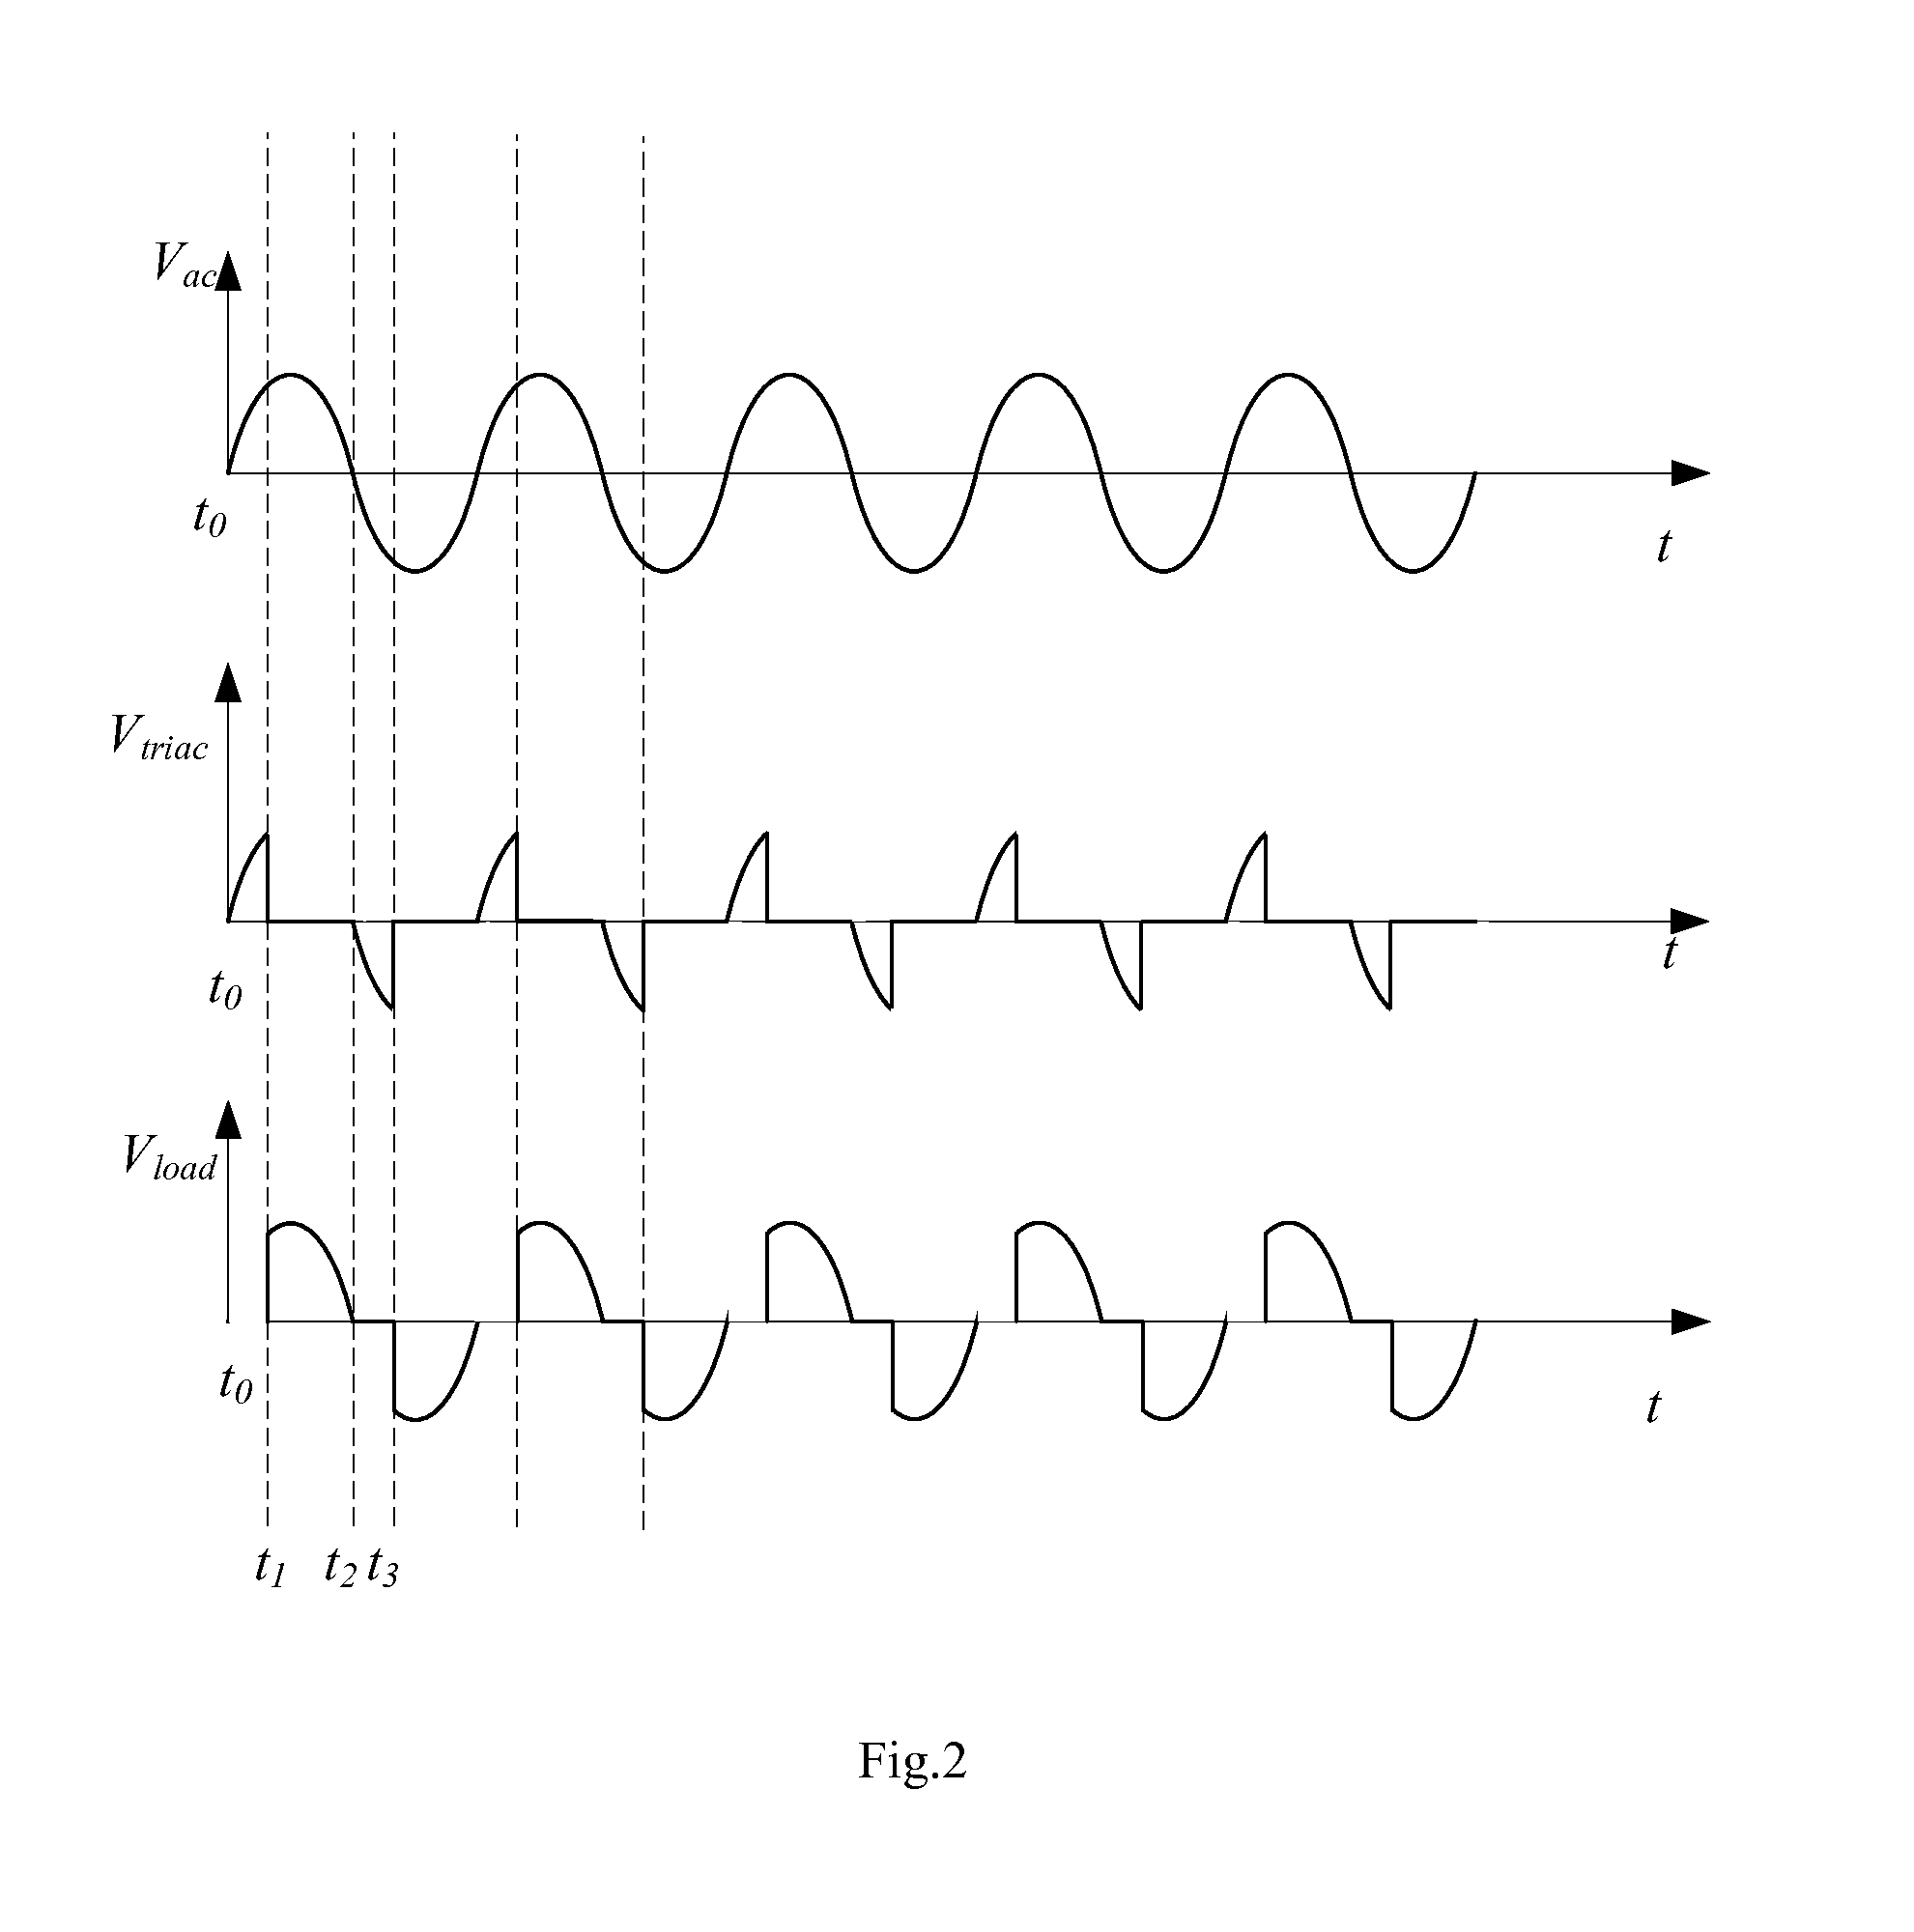 LED dimming device and LED dimming and driving circuit